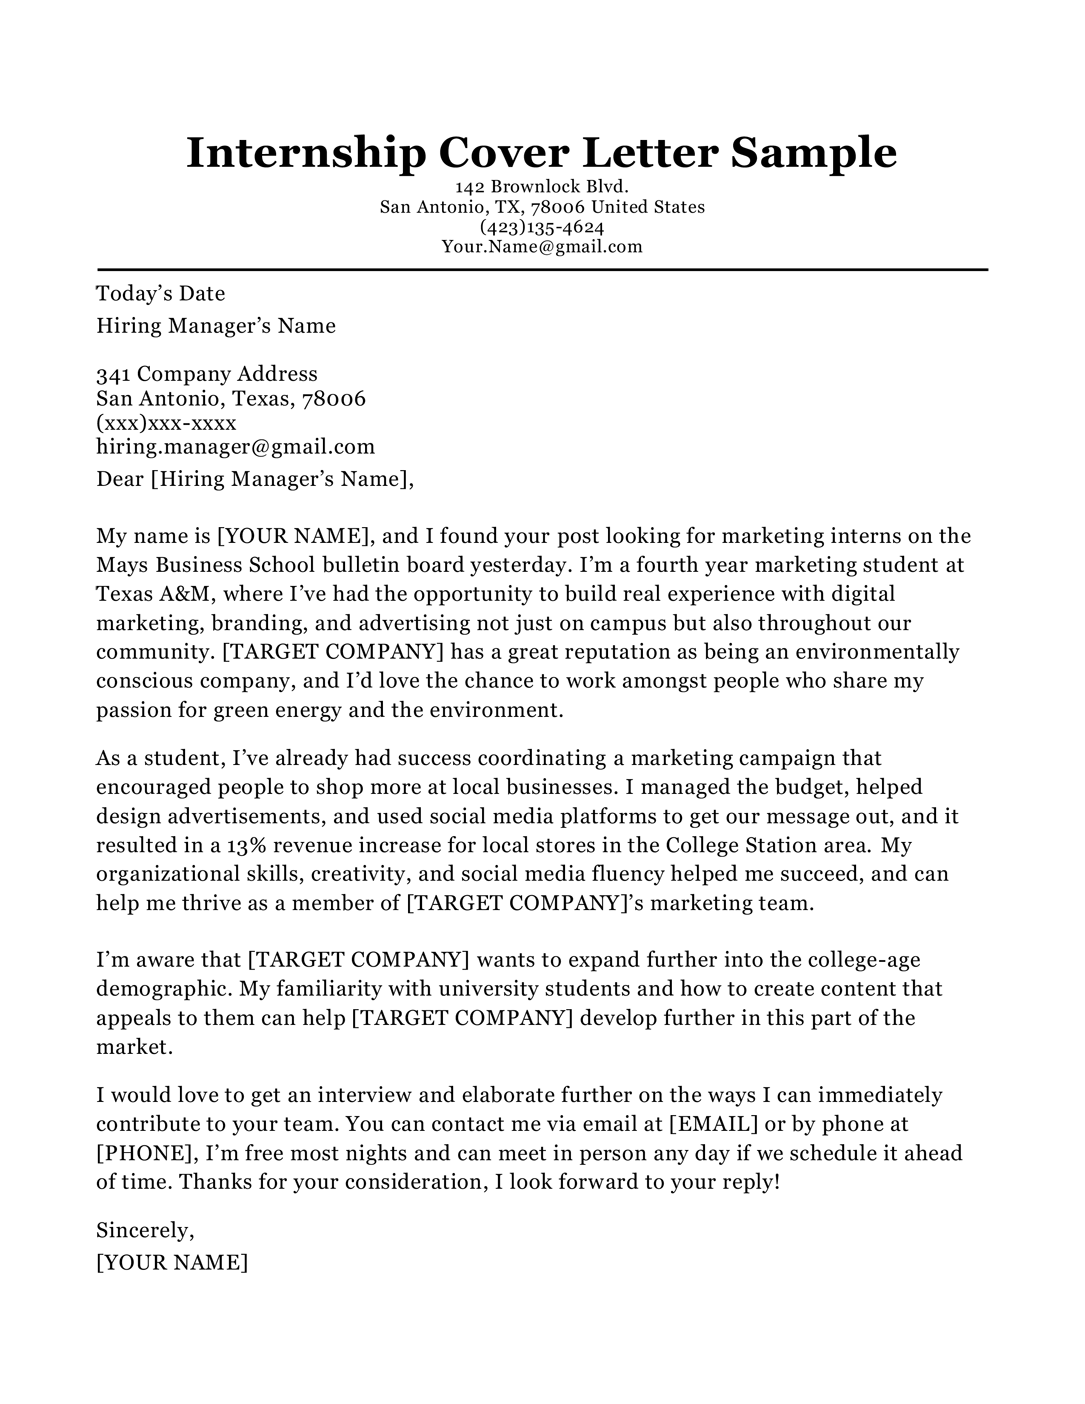 College Grad Cover Letter Entry Level from resumecompanion.com